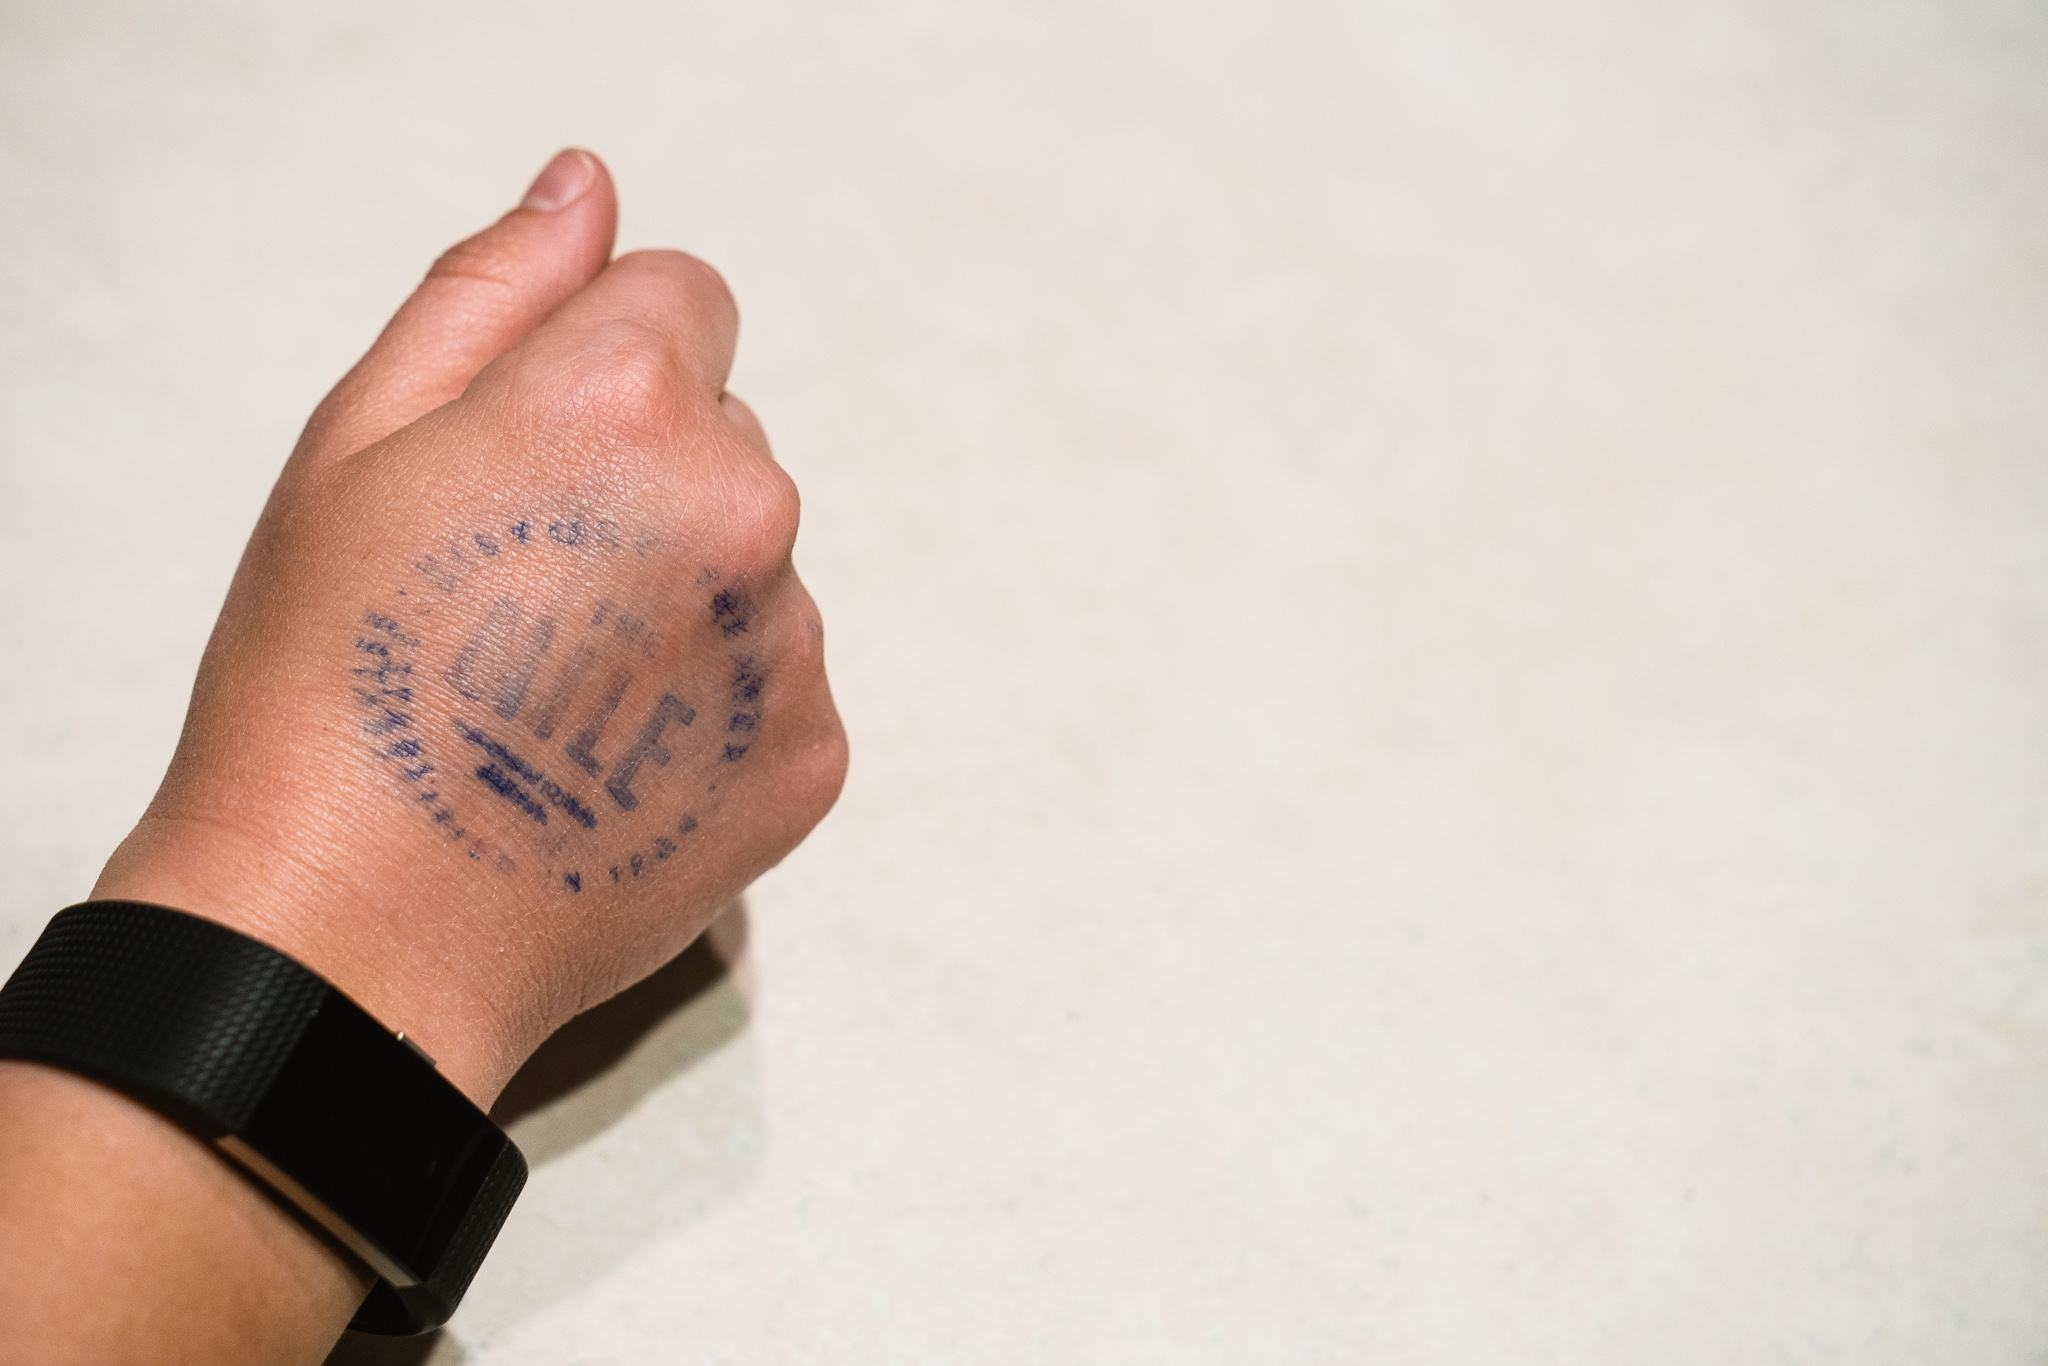 The Nile stamp on hand after a concert date night.